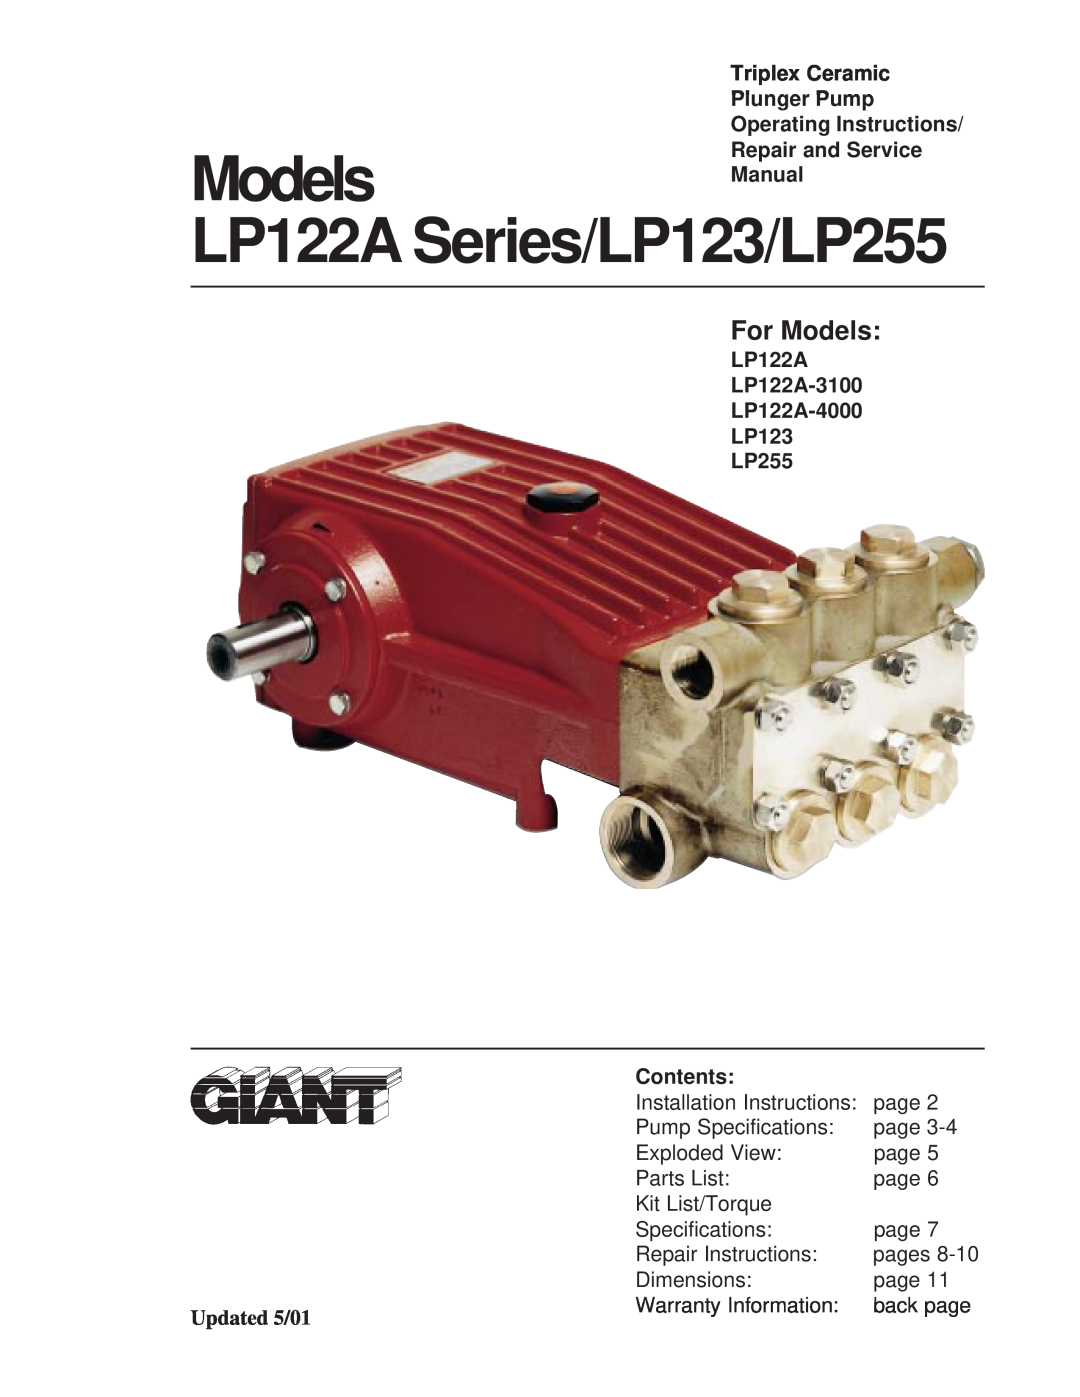 Giant LP123 Series service manual Triplex Ceramic Plunger Pump Operating Instructions, Repair and Service, Contents 